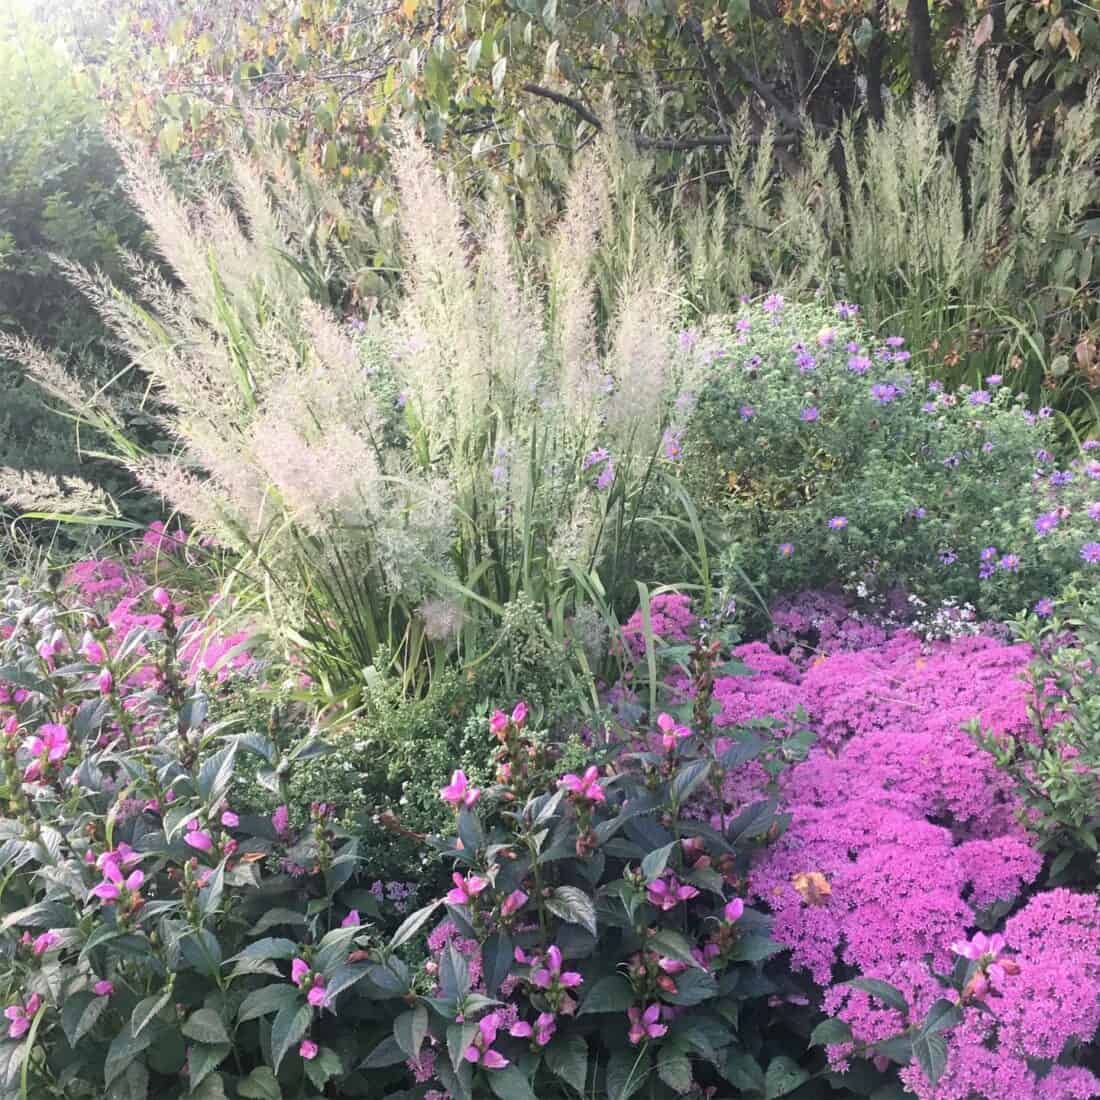 A garden with pink flowers and grasses.